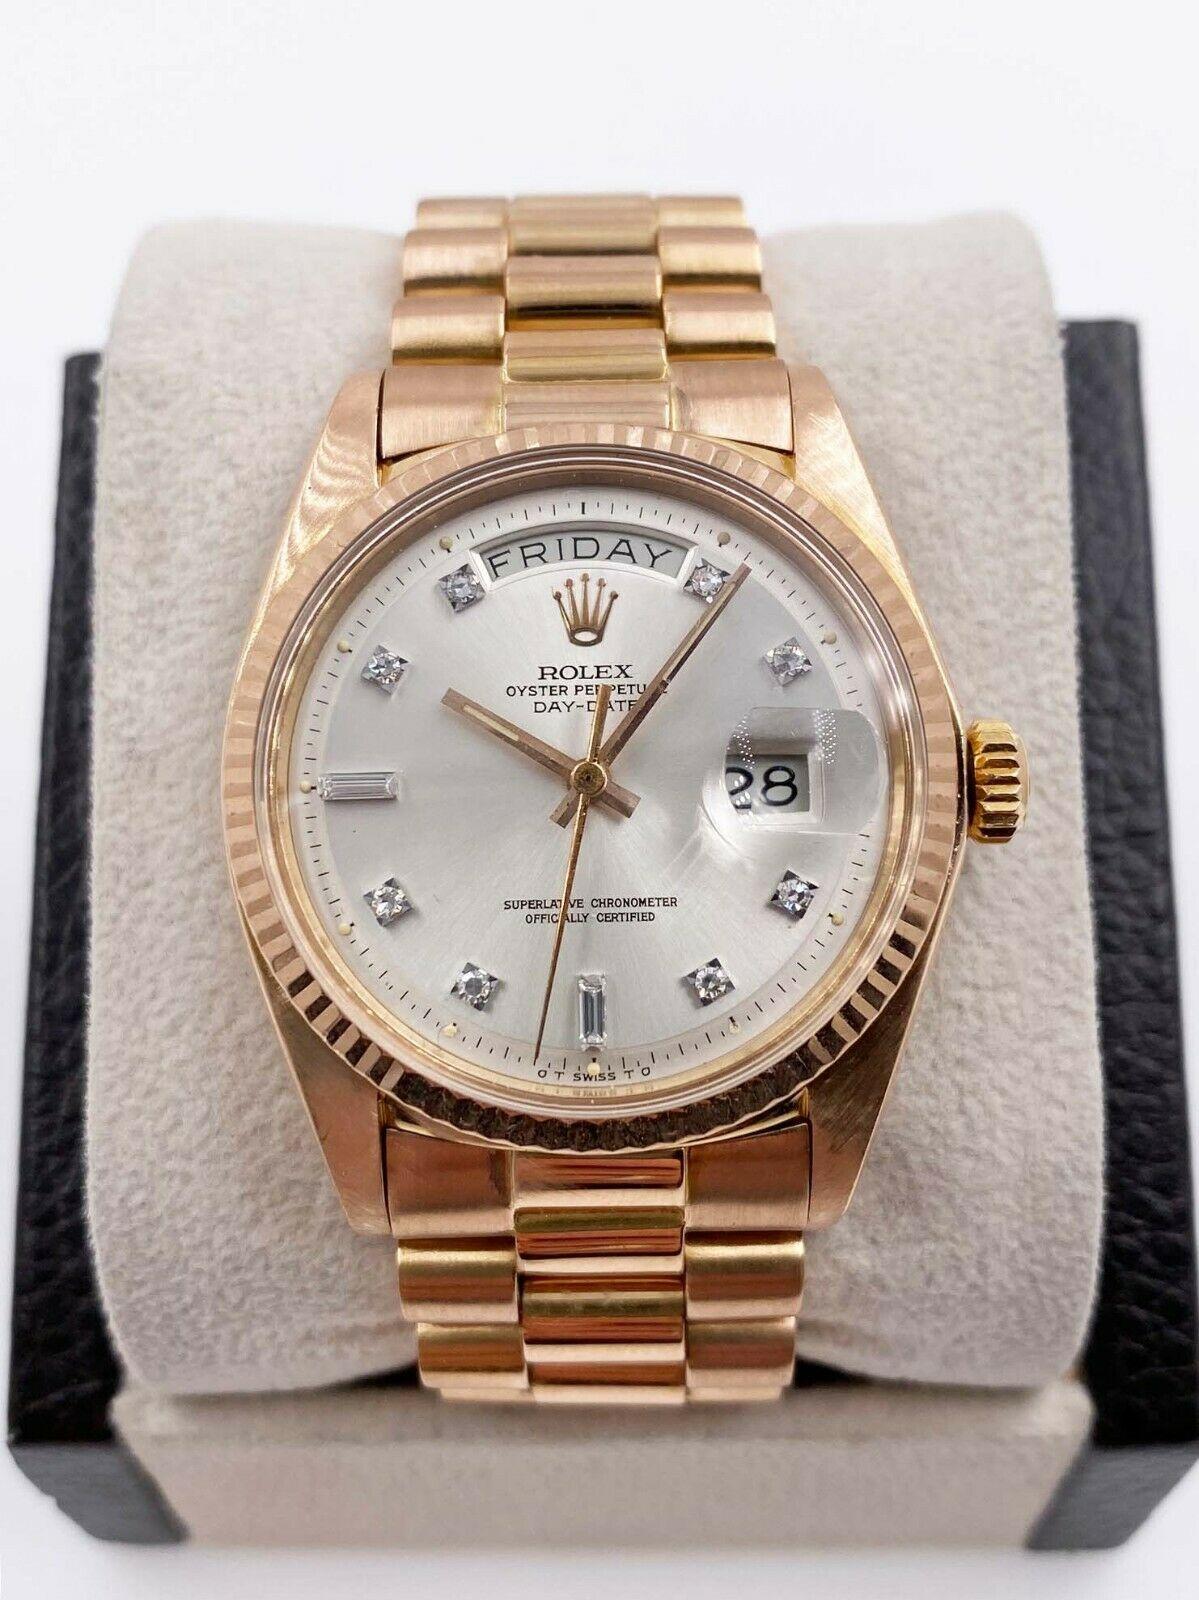 Style Number: 1803
Serial: 3870***
Model: President Day Date 
Case Material: 18K Rose Gold
Band: 18K Rose Gold
Bezel:  18K Rose Gold
Dial: Silver Diamond Dial 
Face: Acrylic 
Case Size: 36mm
Includes: 
-Elegant Watch Box
-Certified Appraisal 
-1